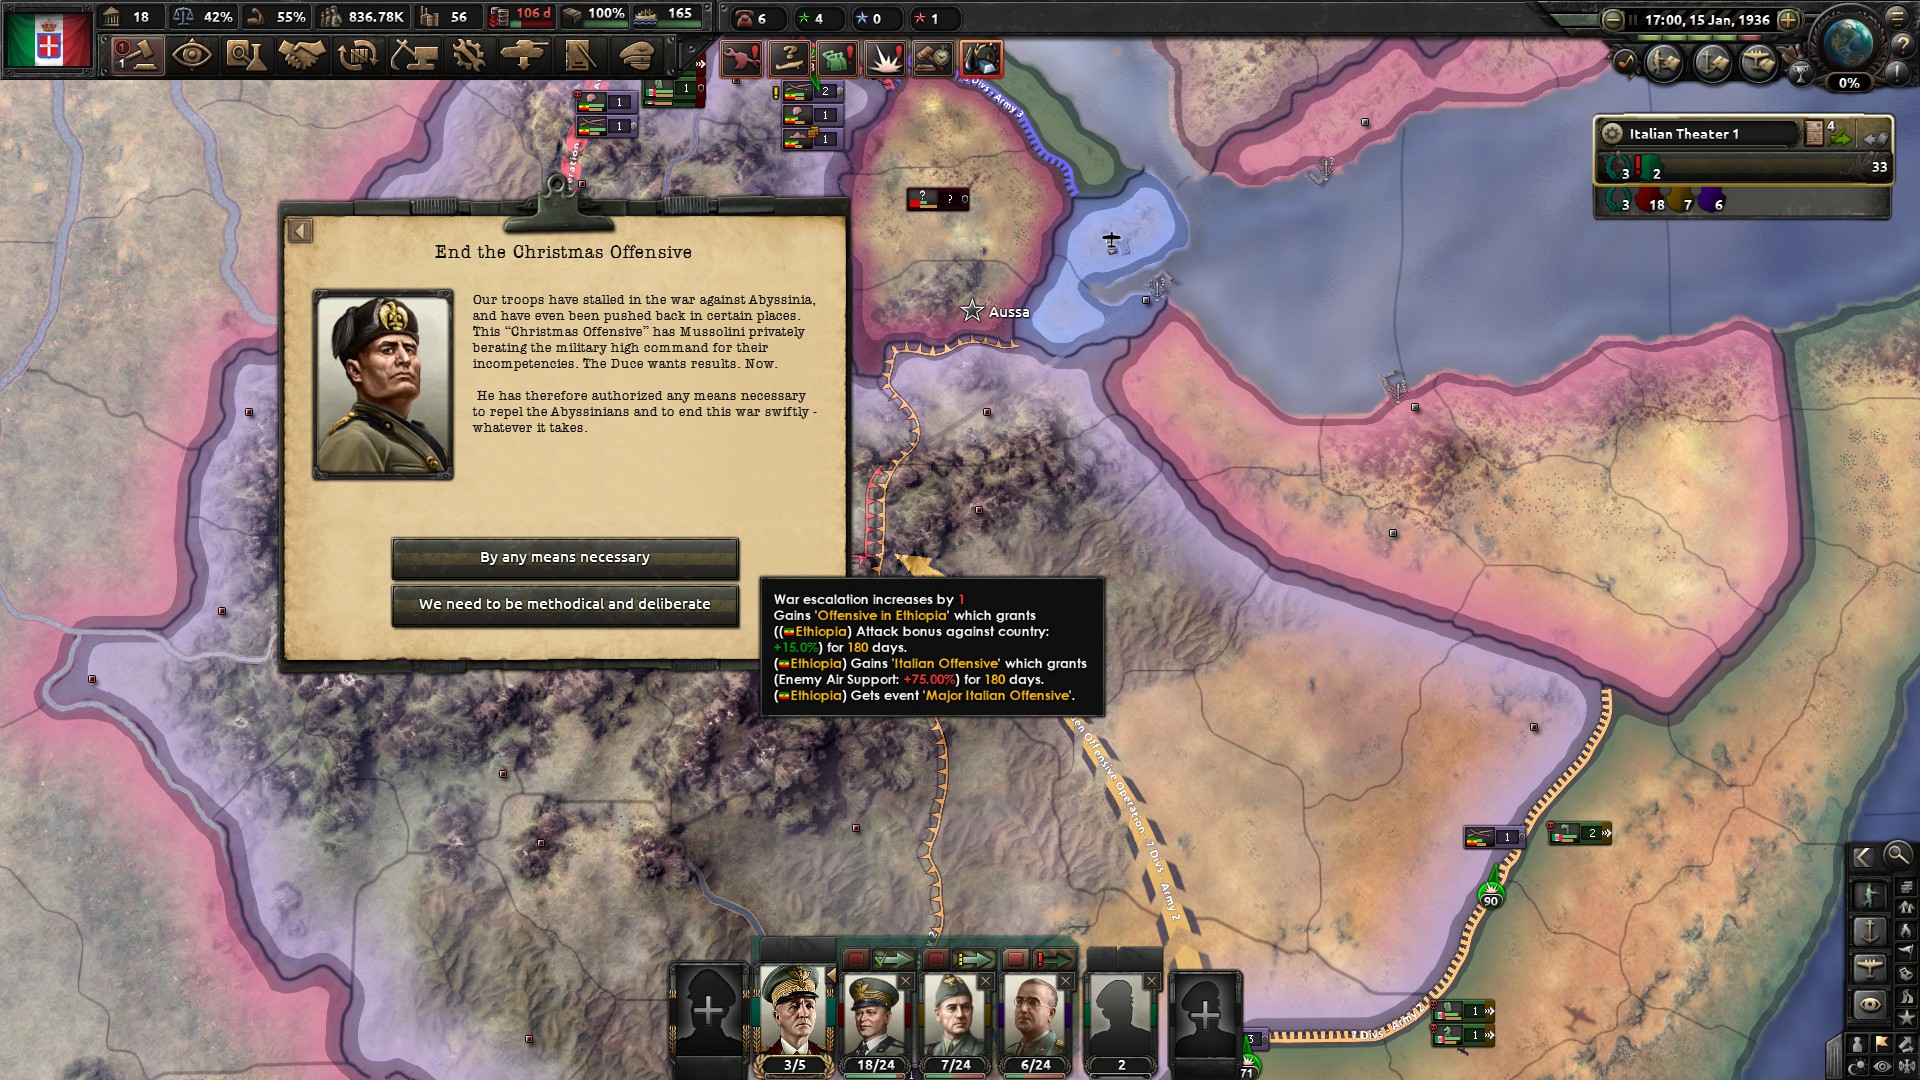 Hearts of Iron IV - How to defeat Ethiopia - Start of the offensive and annexation of Aussa: - 3EF5D6E